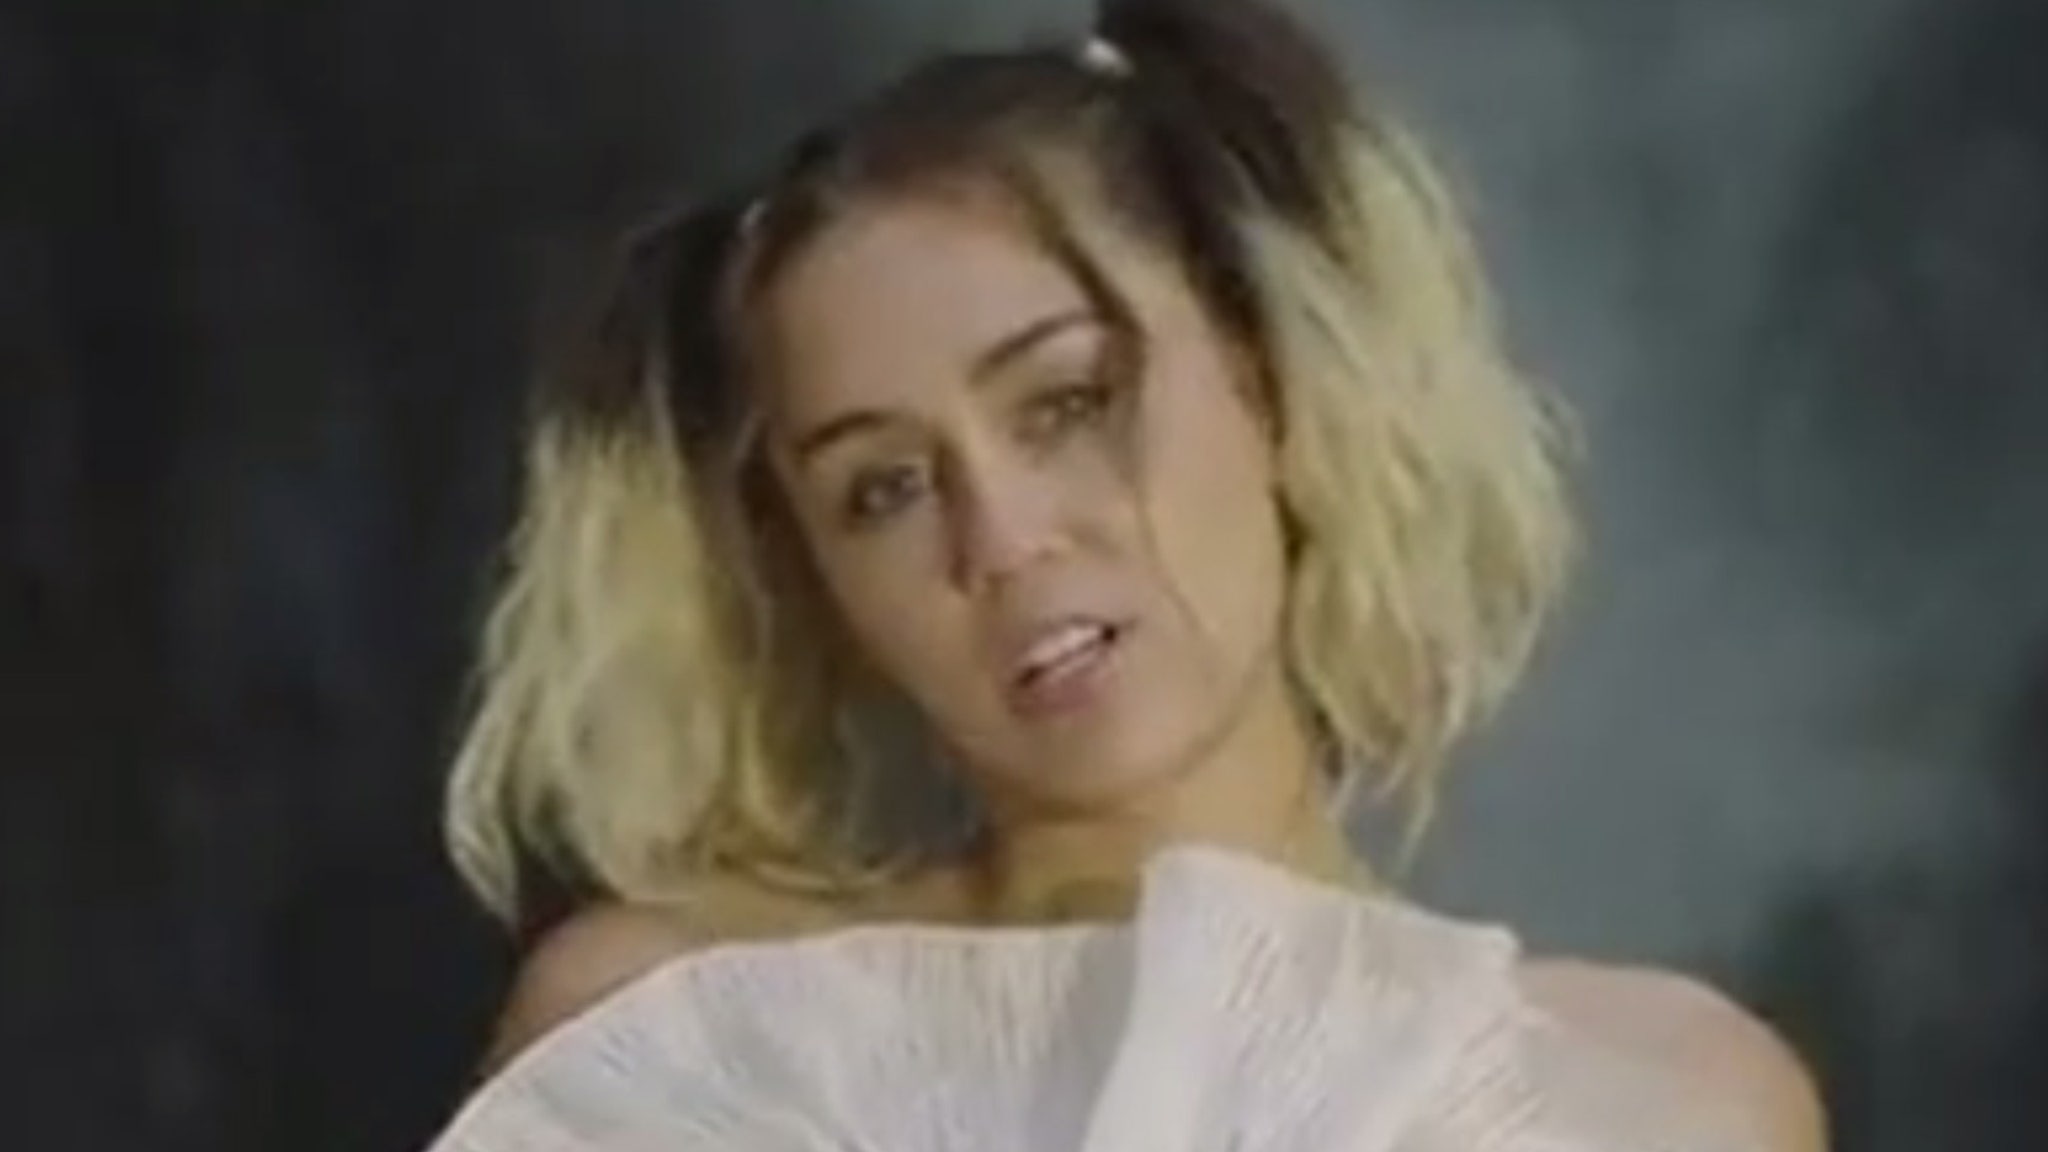 Miley Cyrus Sings And Dances For Love In Malibu Music Video 